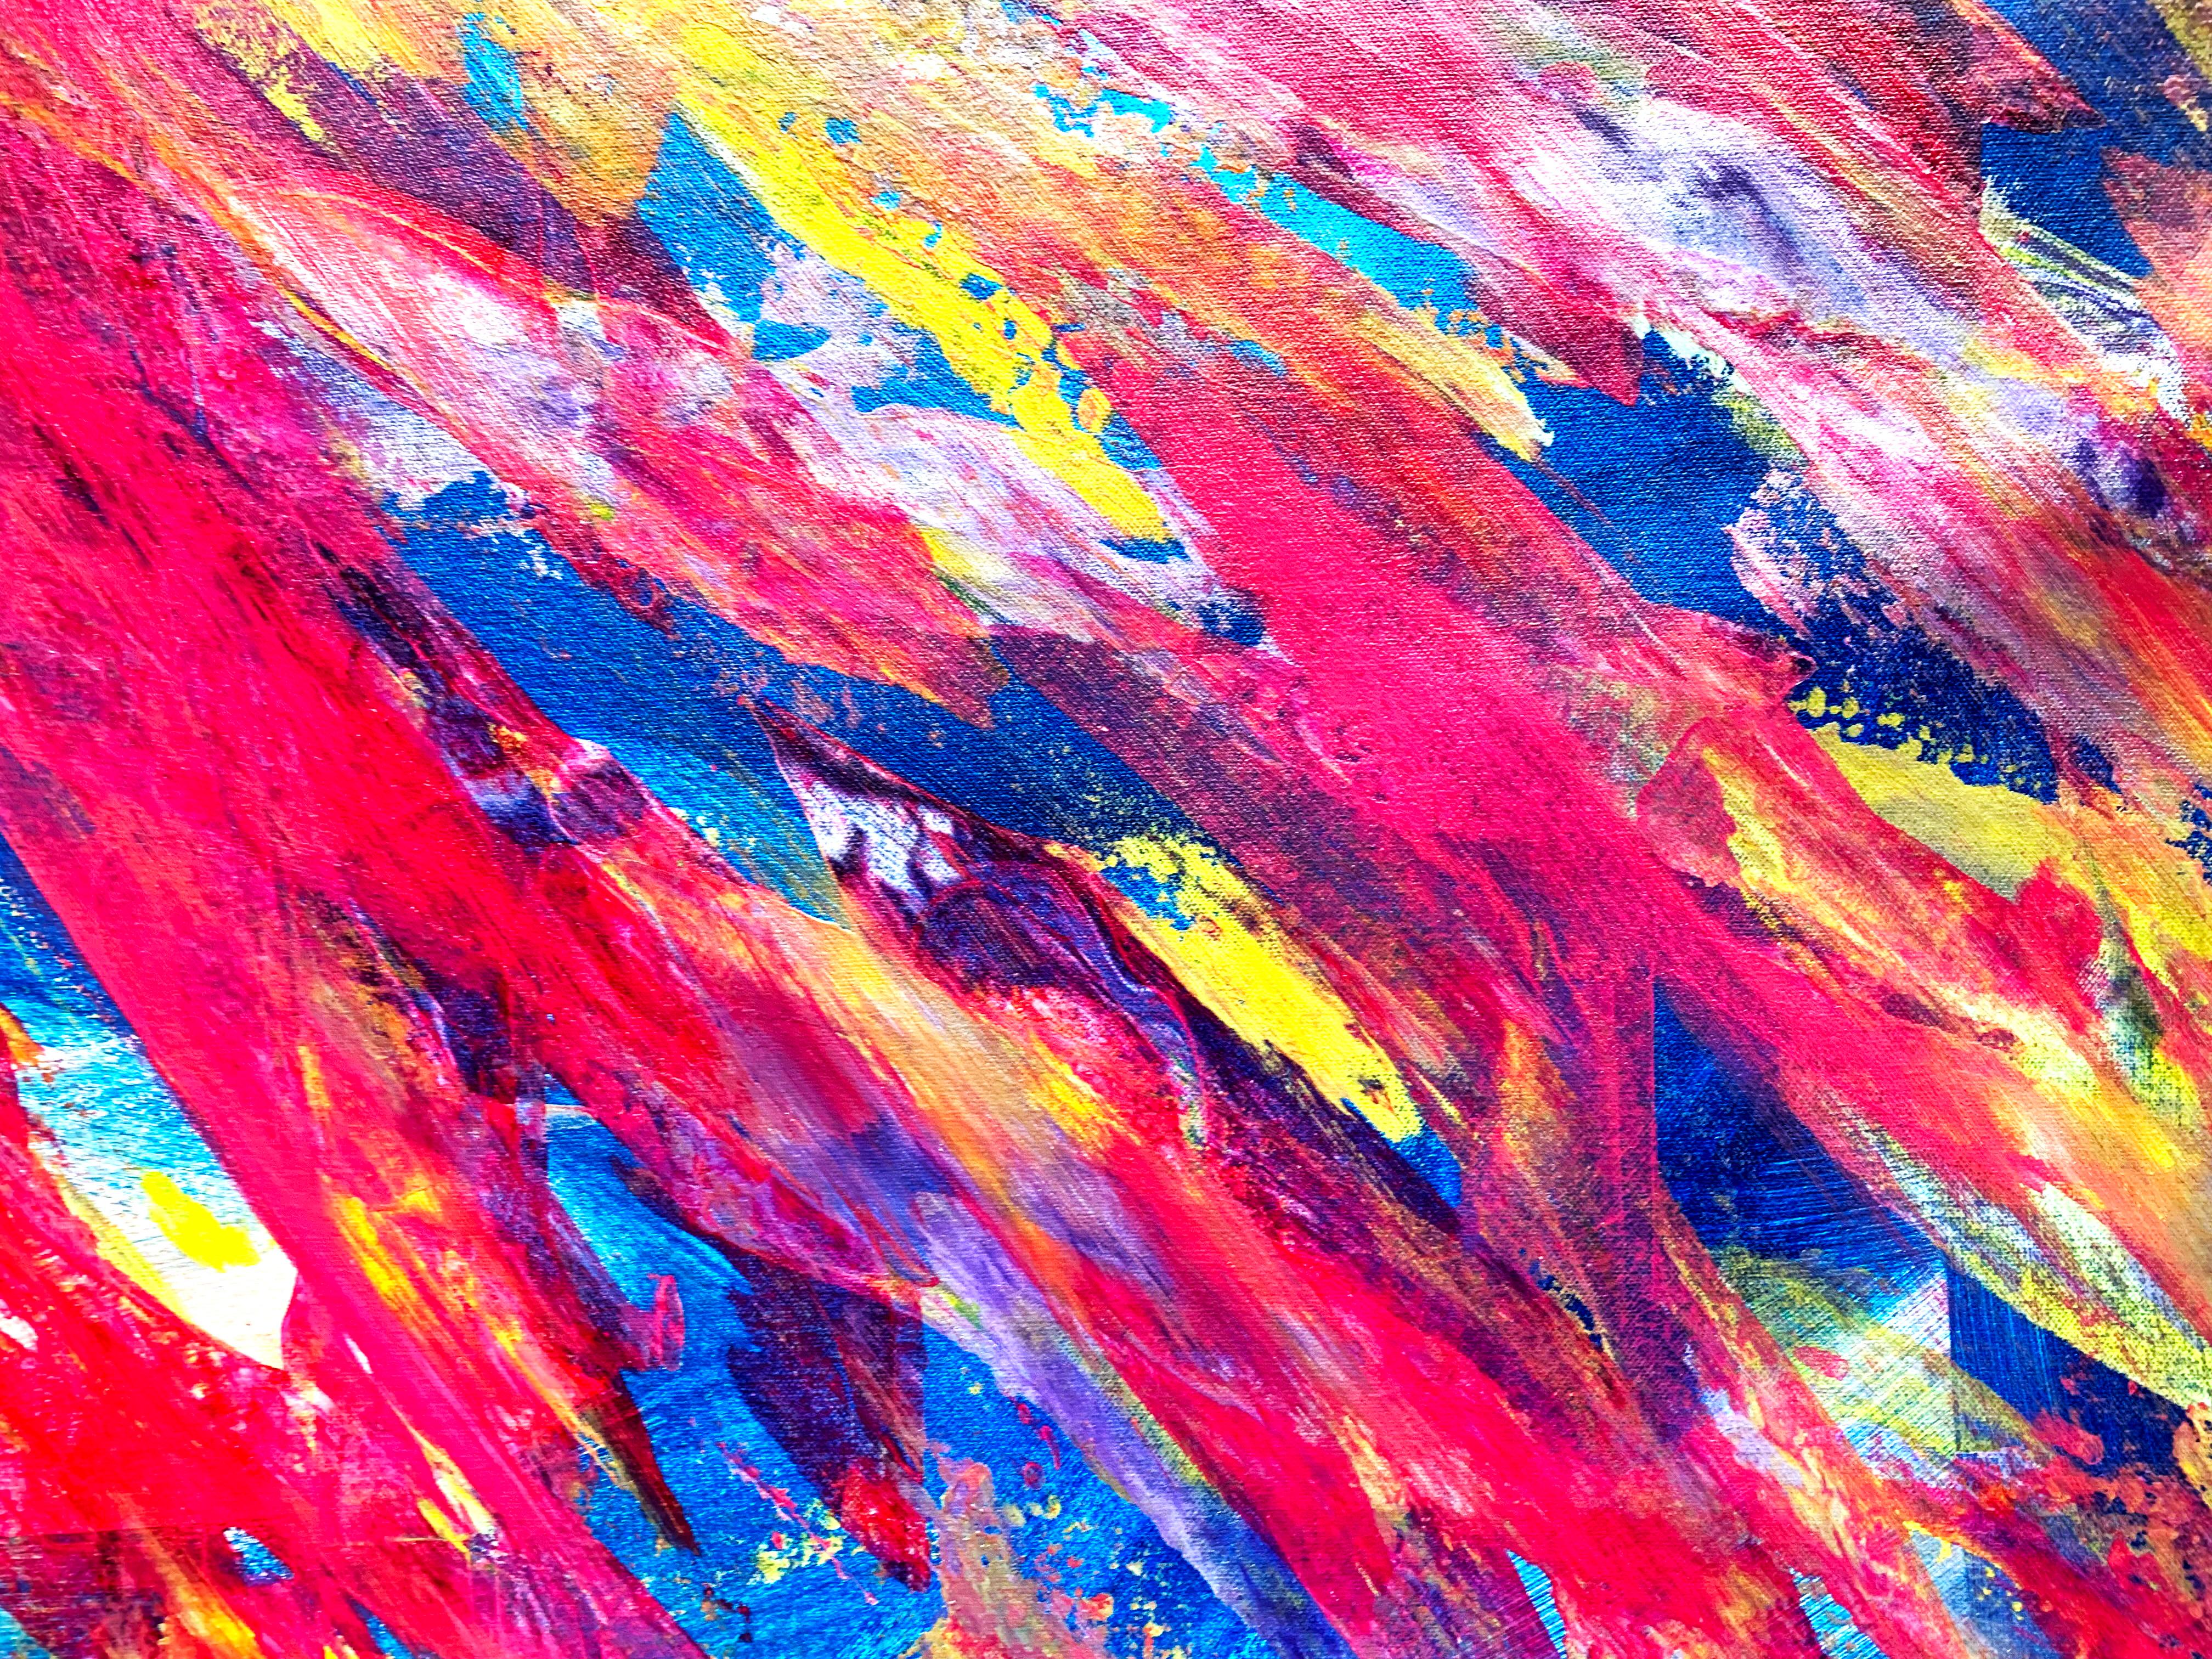 Colour Band  - Abstract Expressionist Painting by Estelle Asmodelle